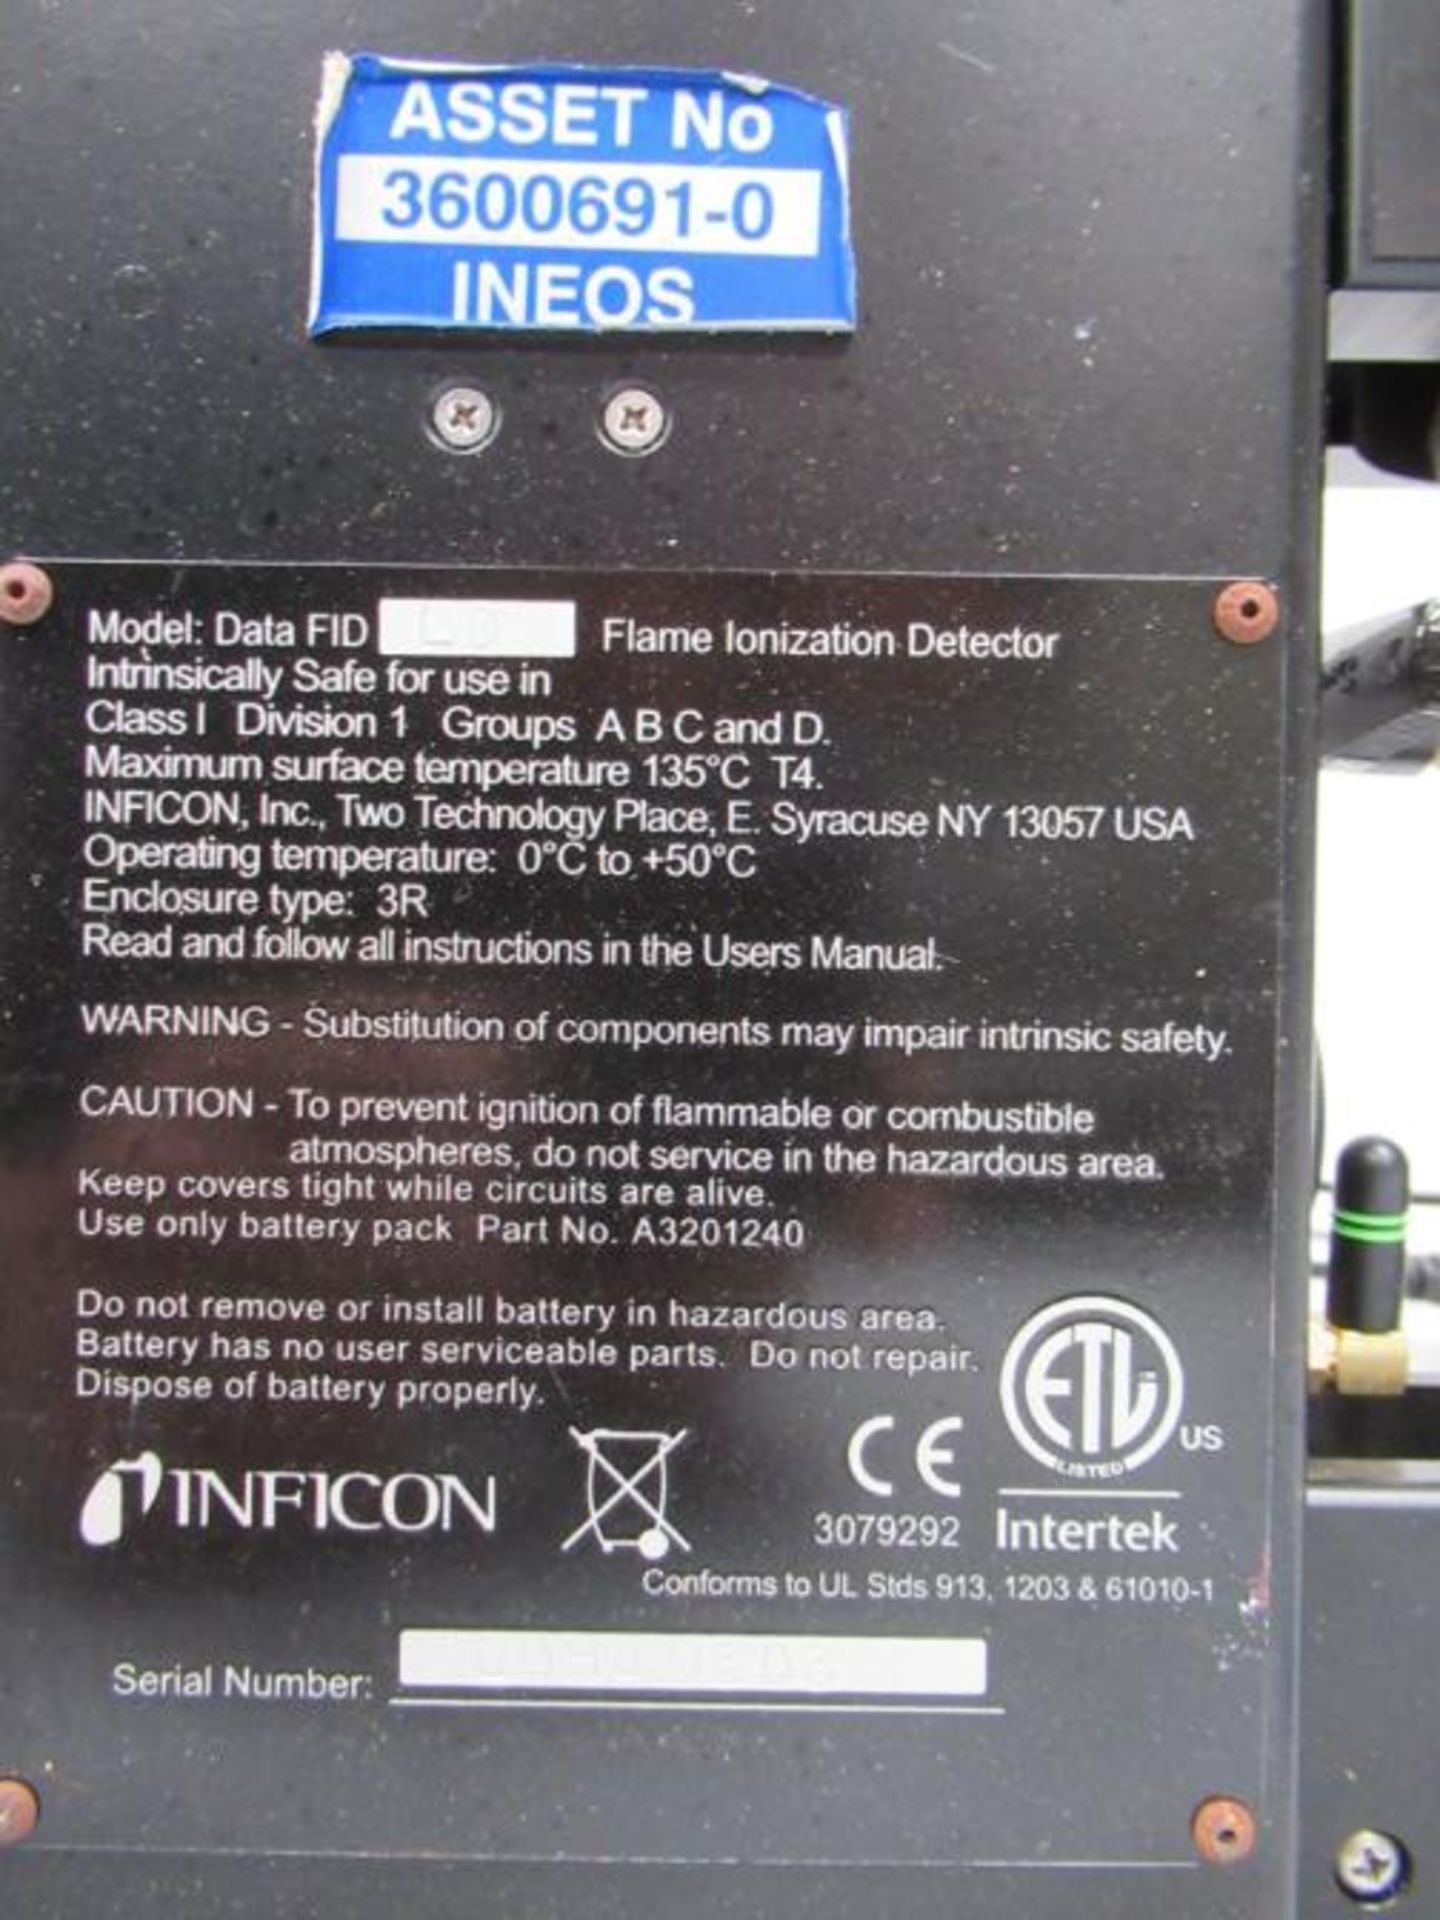 Inficon DataFID Portable Flame Ionization Detector - Image 5 of 5